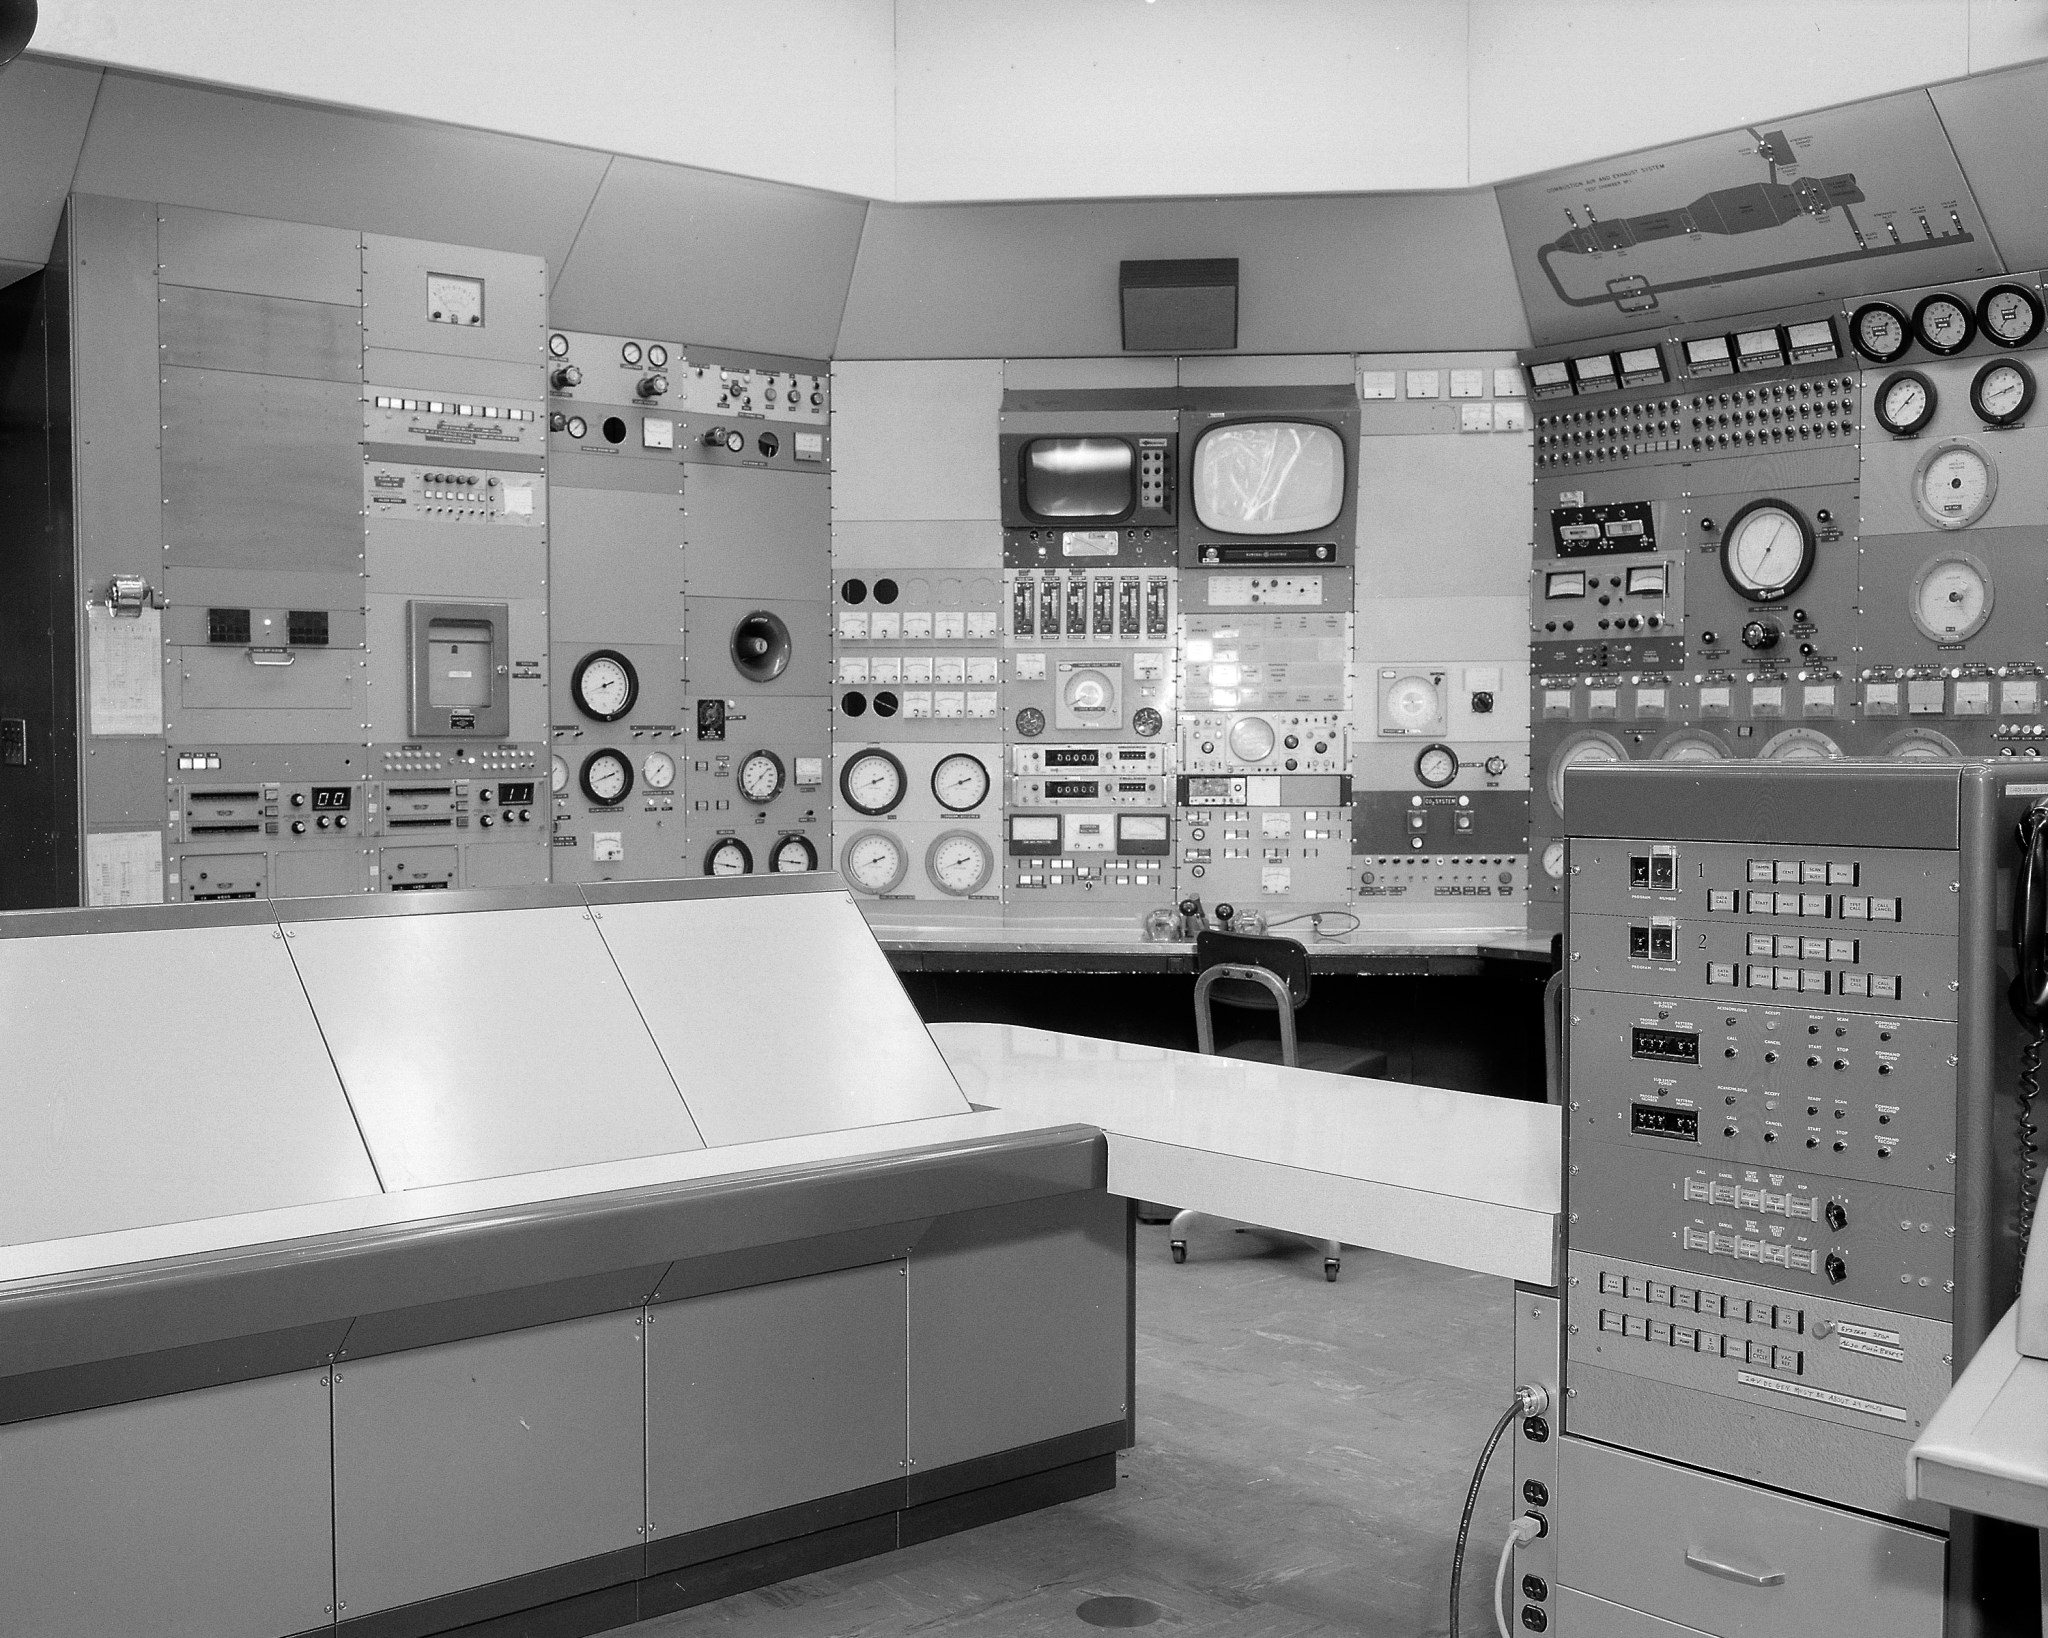 A black and white image from 1970 showing the inside of the PSL facility.